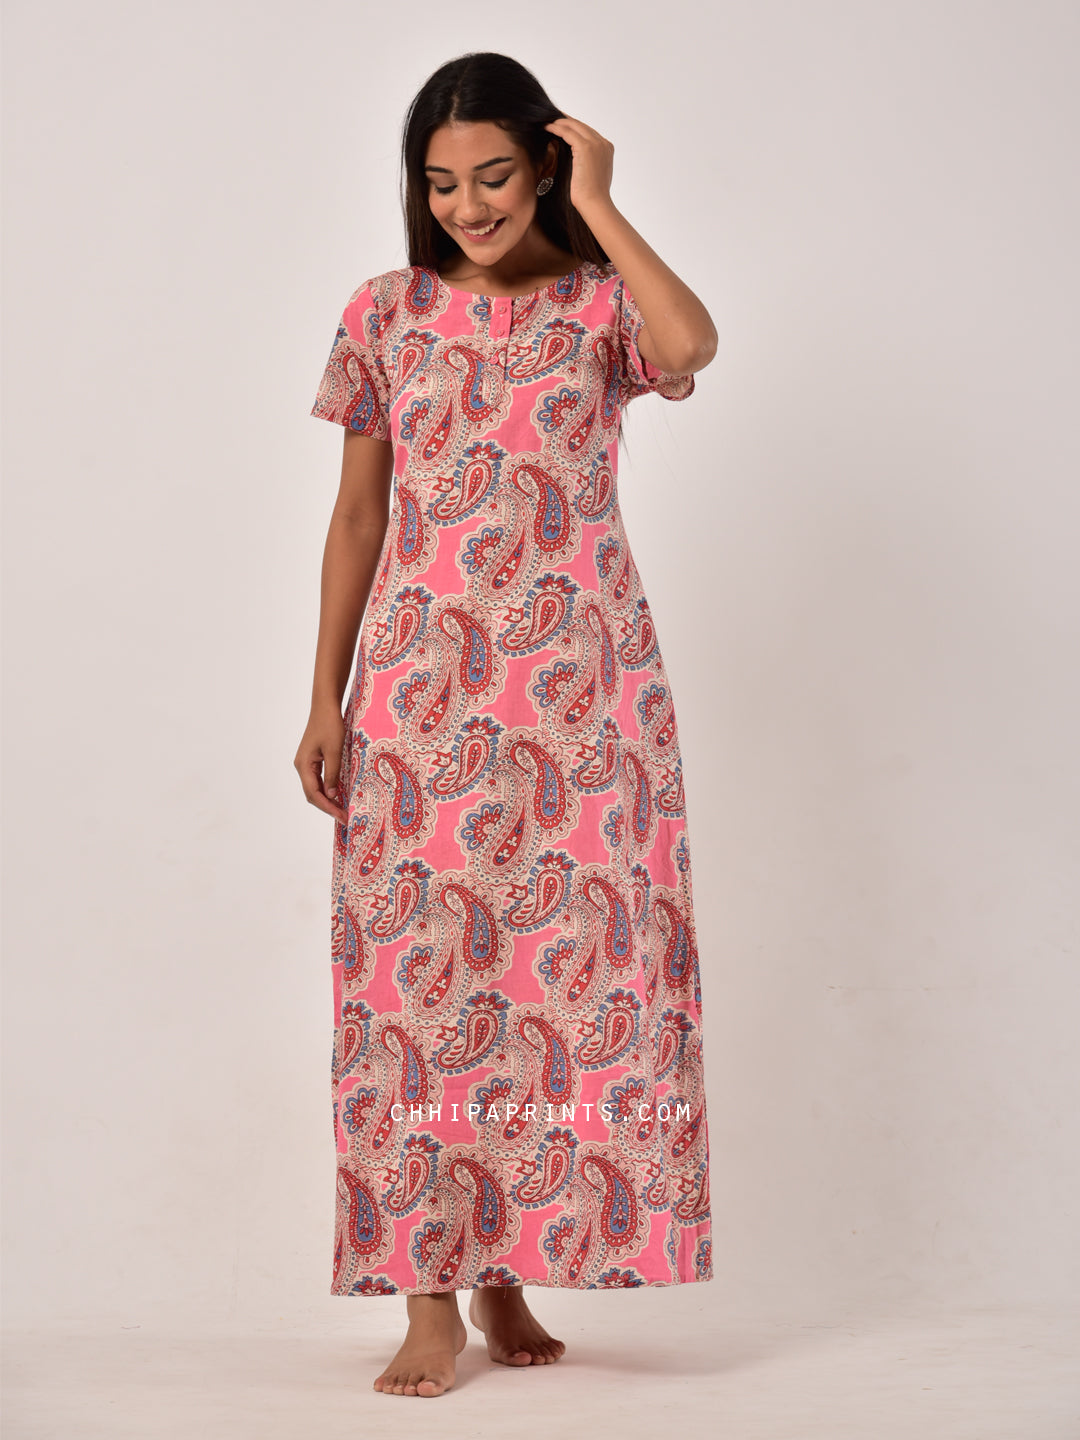 Cotton Paisley Night Gown in Pink